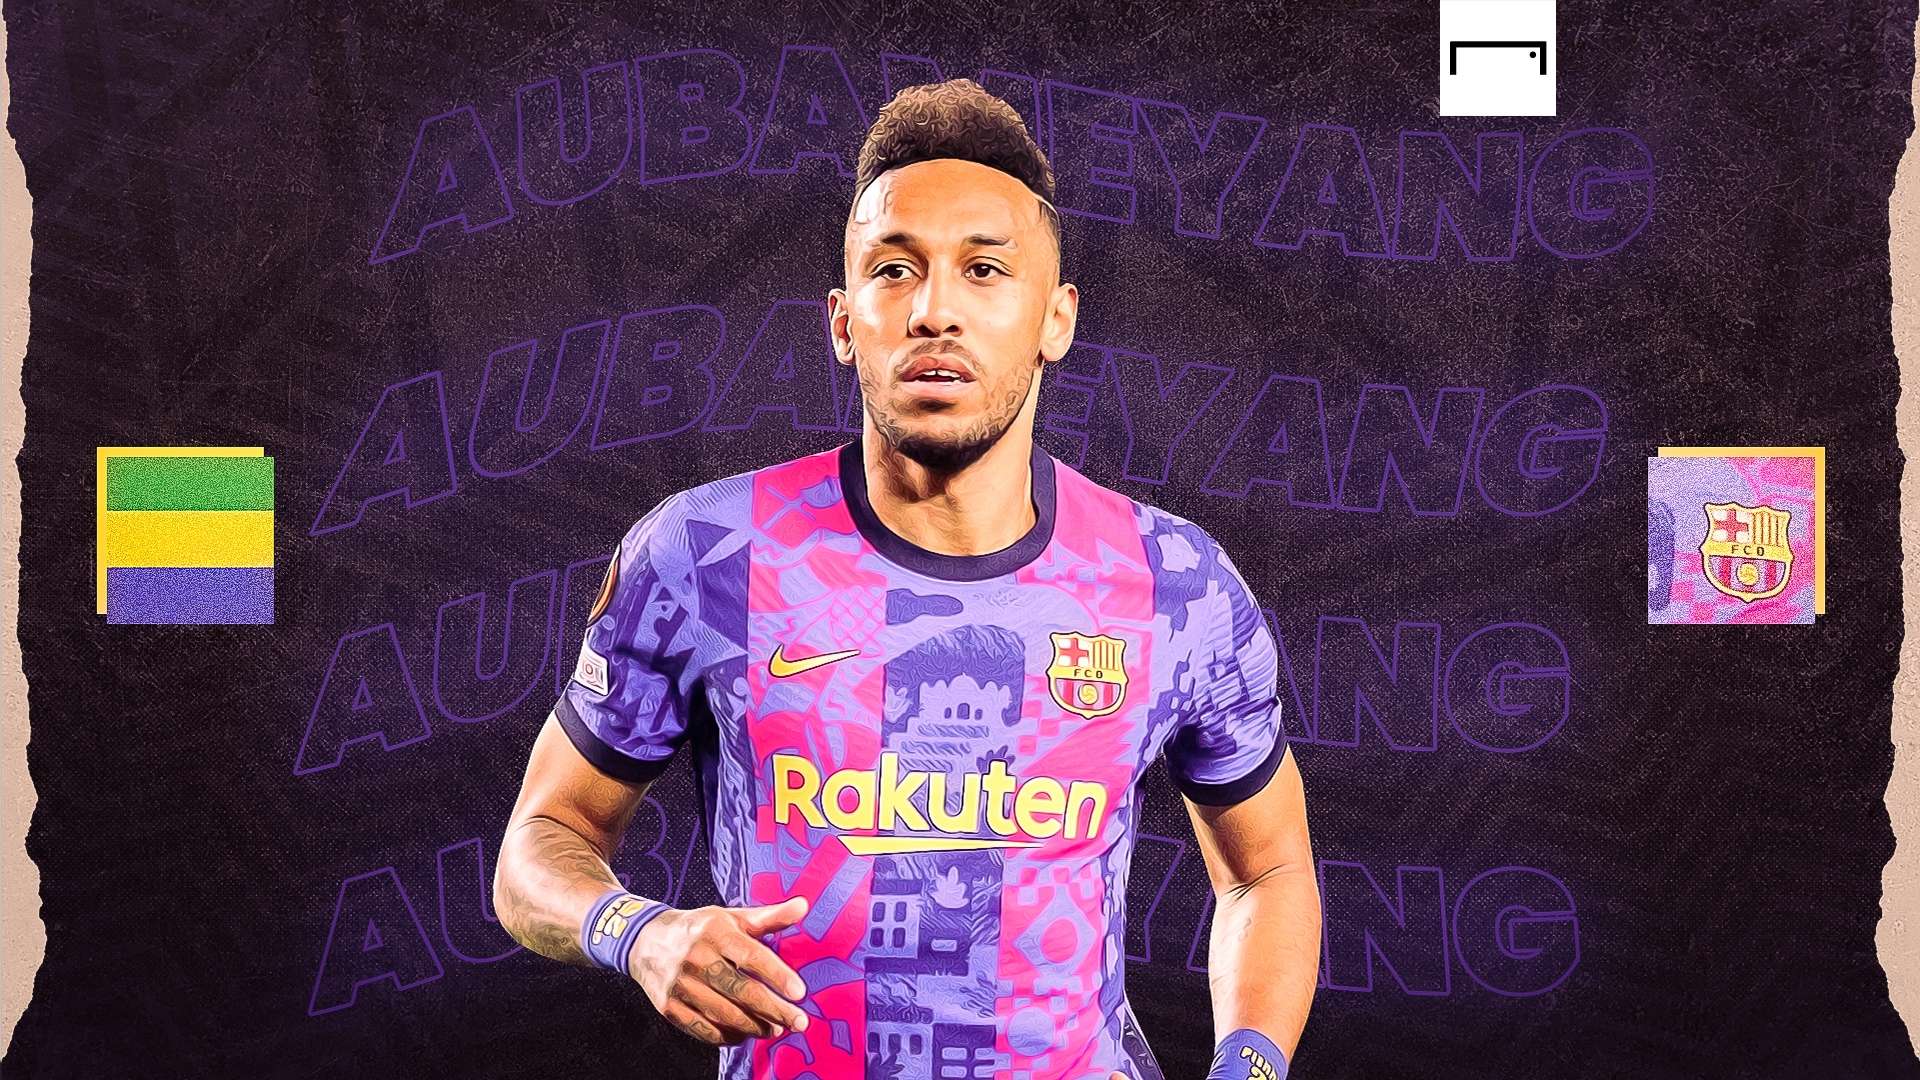 Aubameyang - What does the future hold?